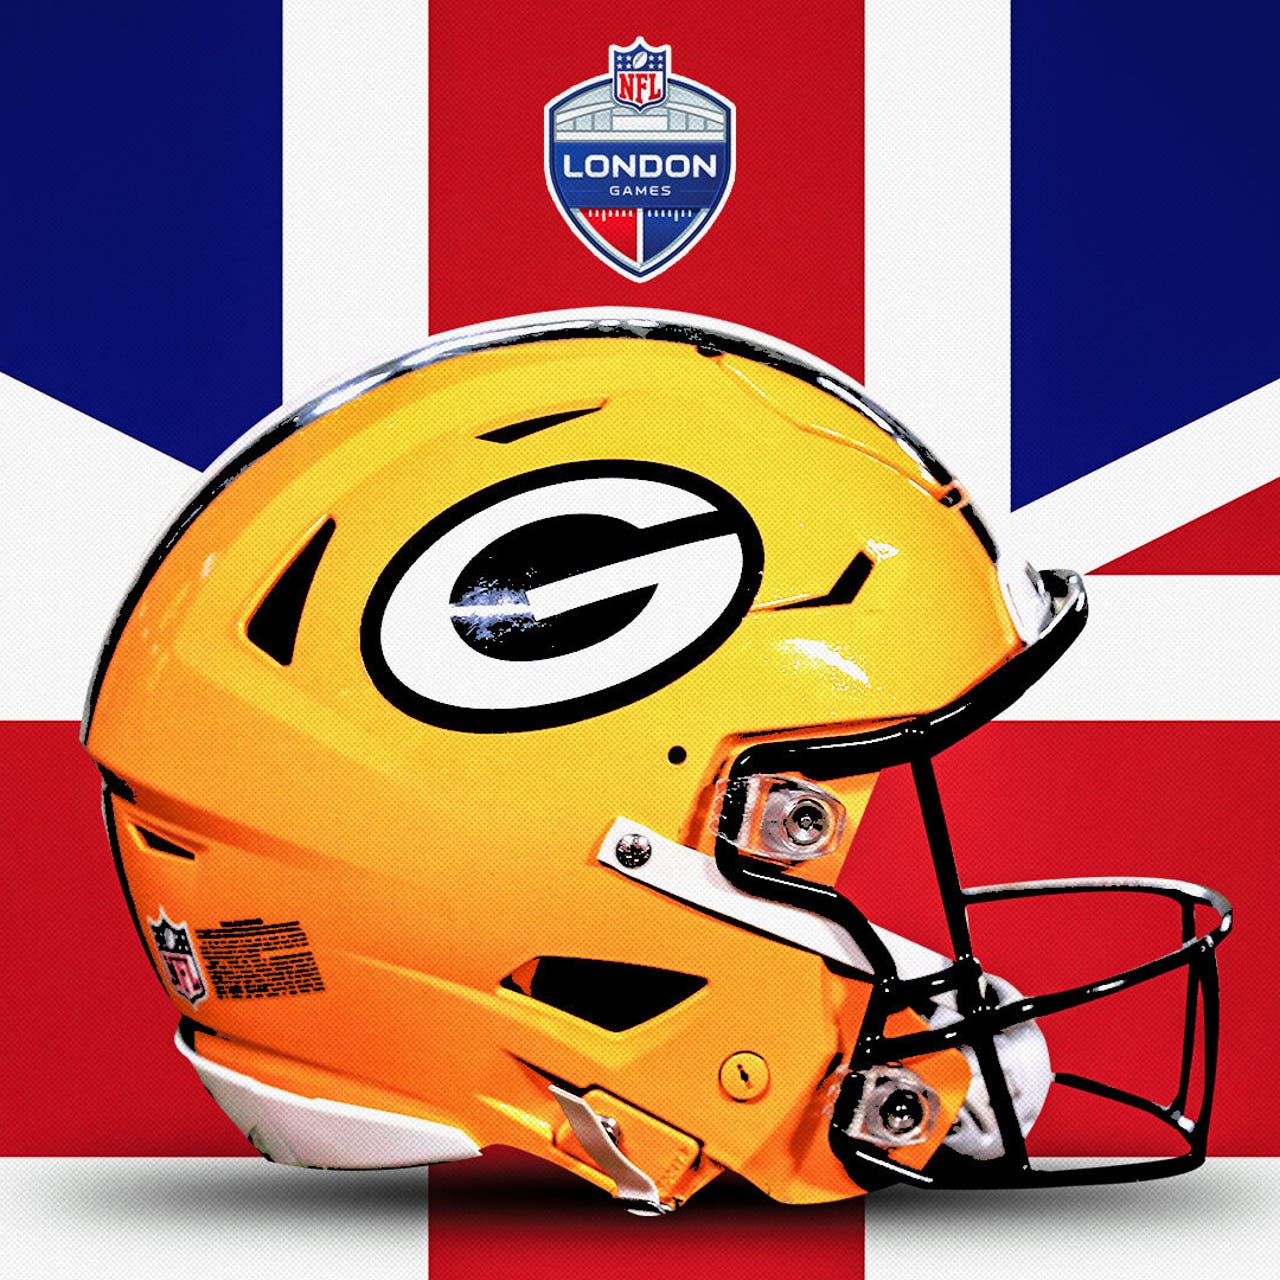 Packers headed overseas for London game next NFL season